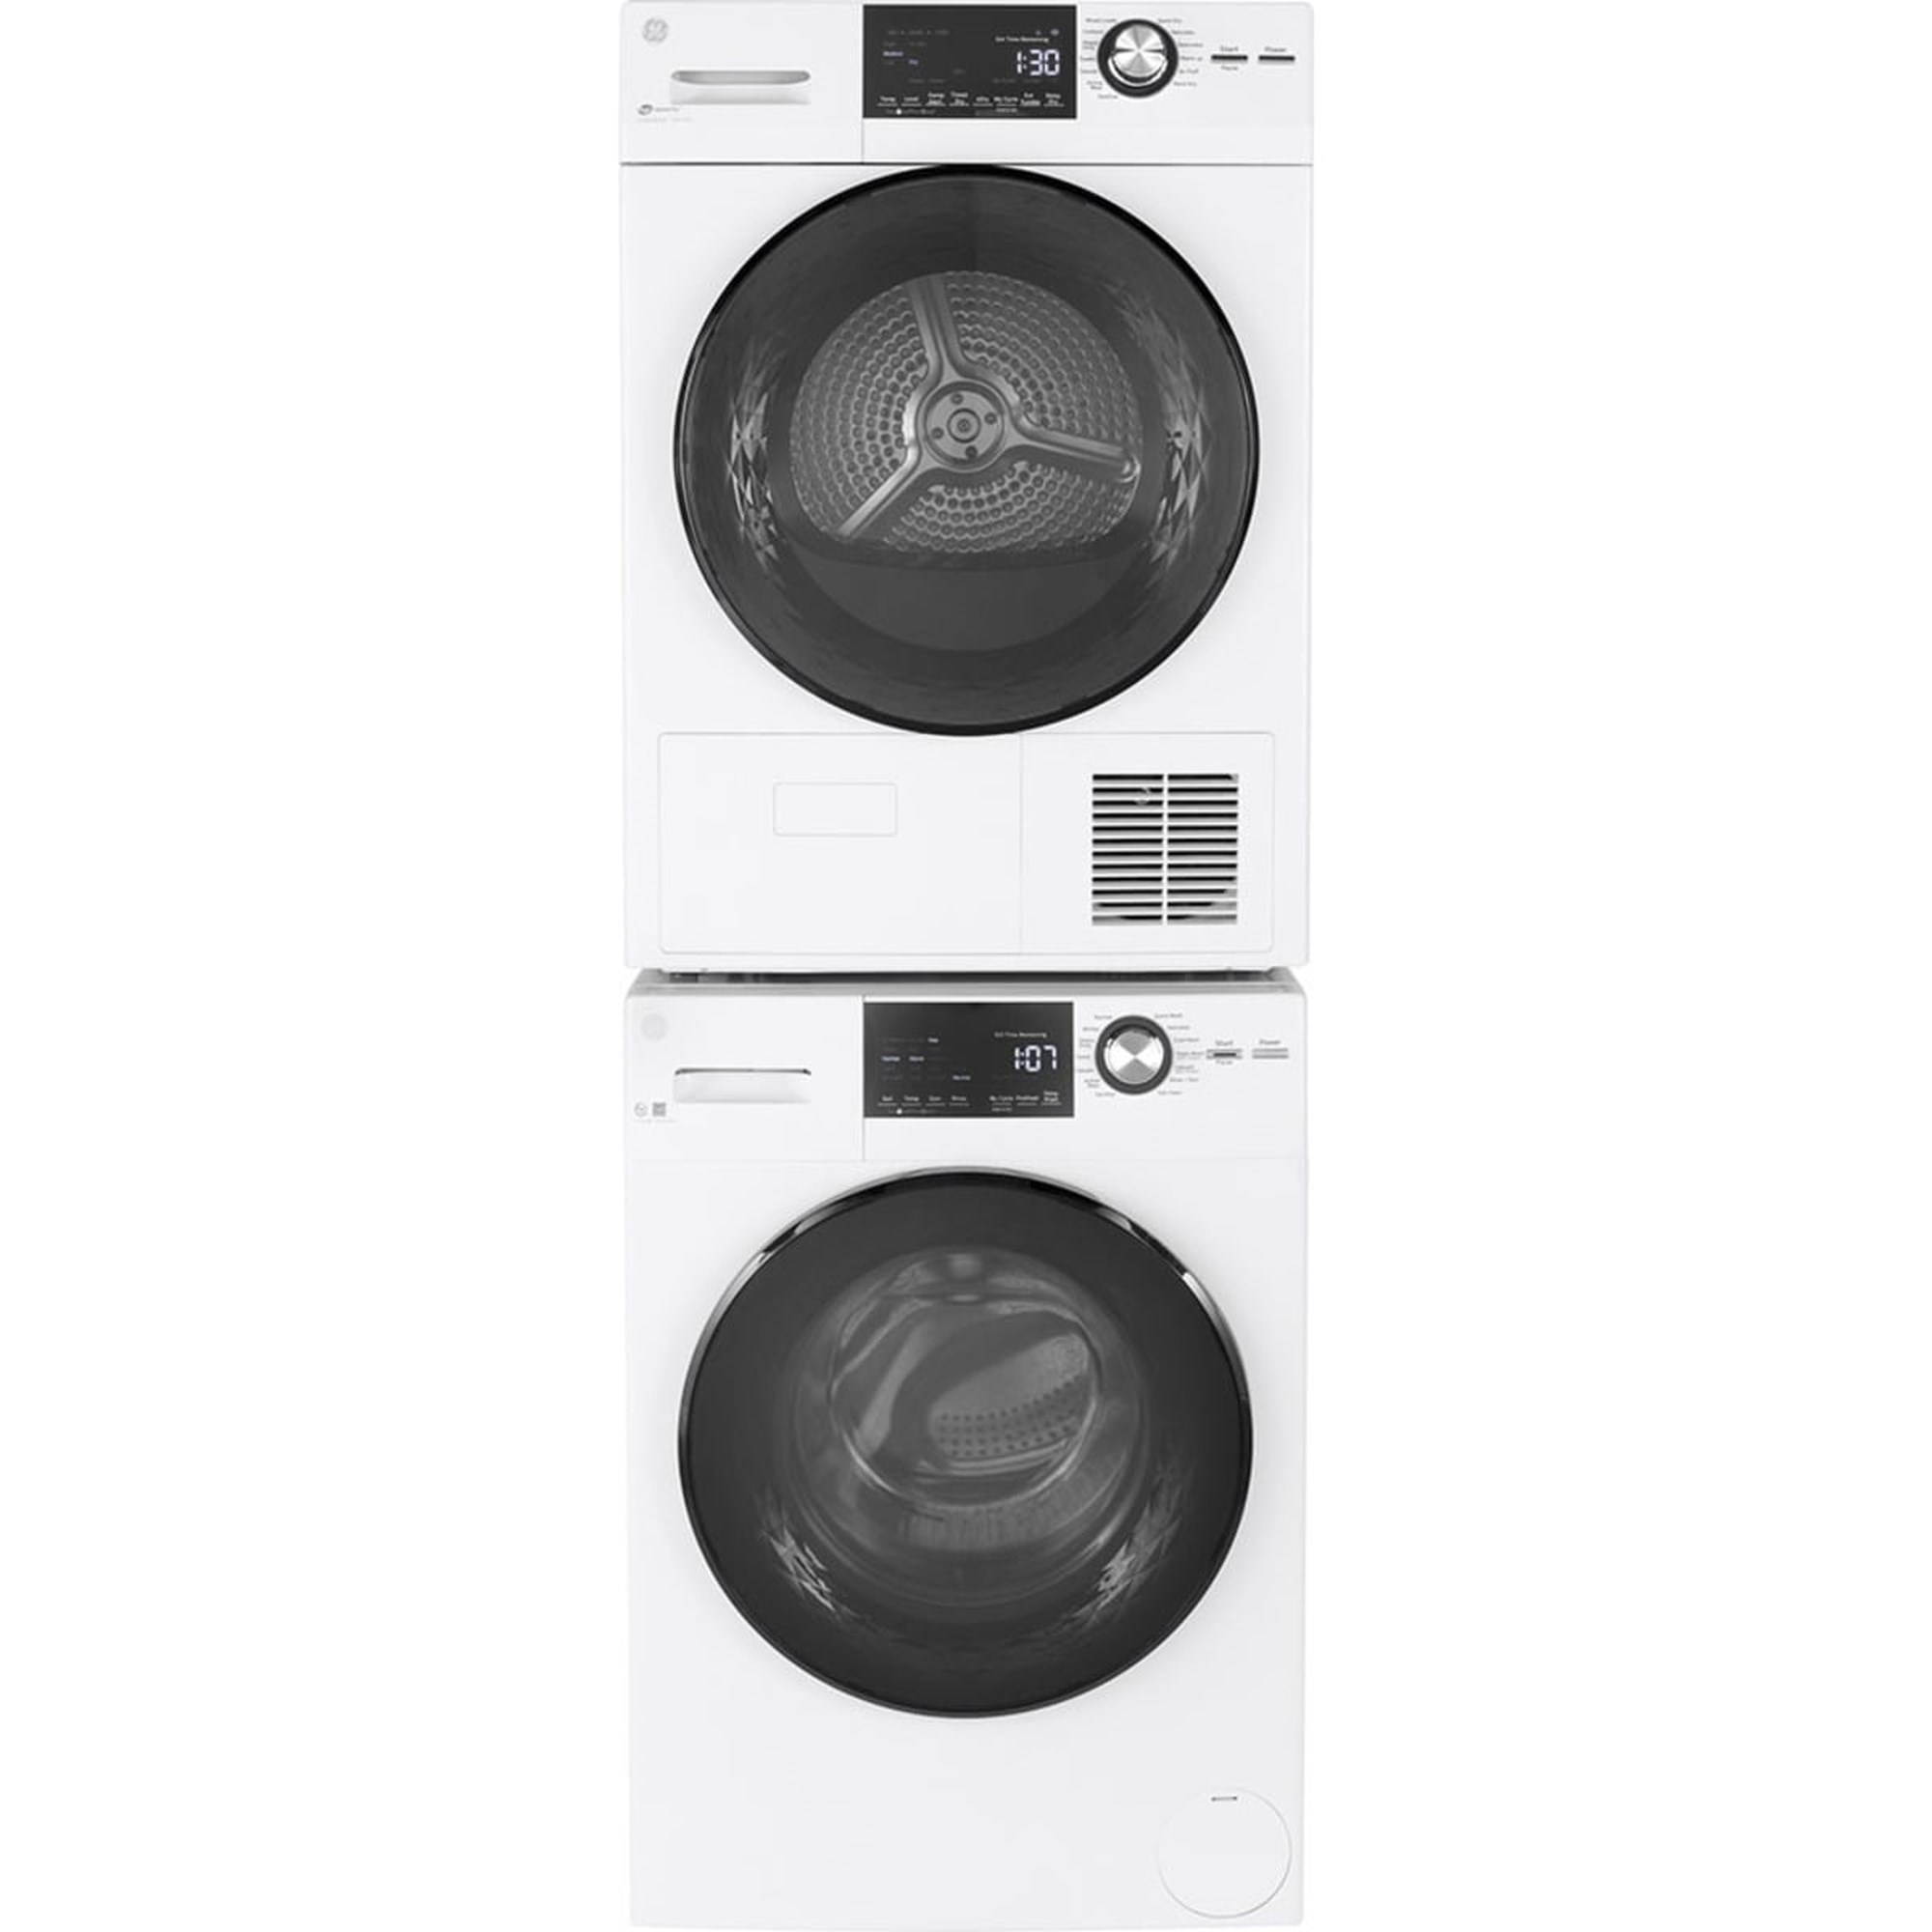 GE 2.8 Cu. Ft. Top Load Washer with Portable White/Black